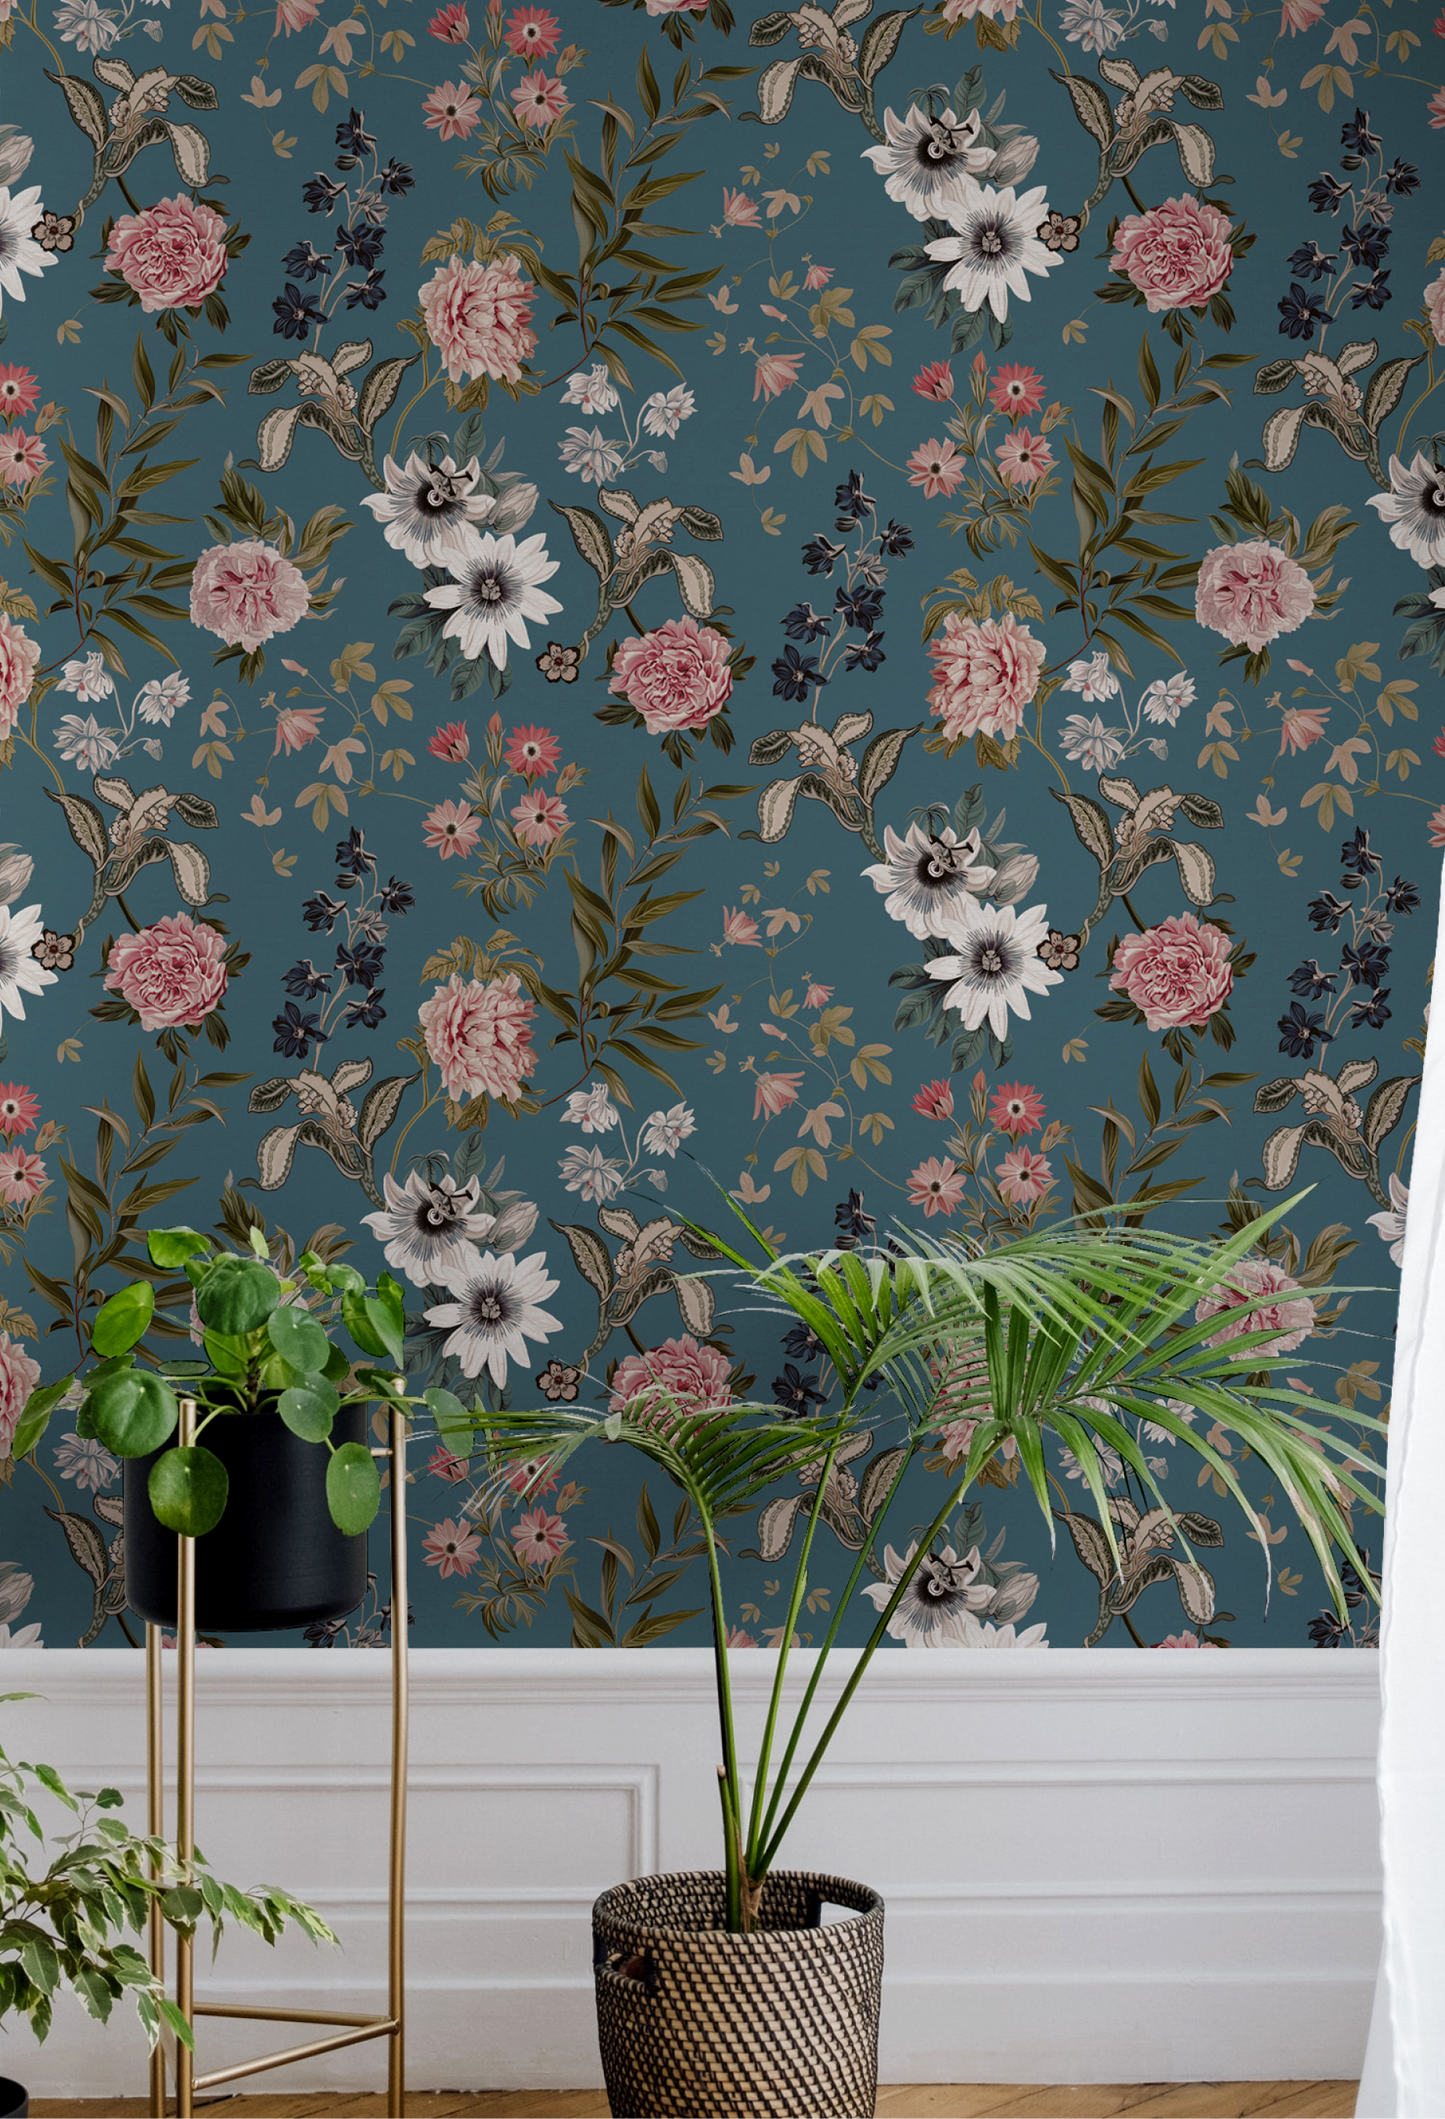 A room with plant pots and wallpaper on a wall from Deus ex Gardenia of Beechcroft Garden Collection in Cerulean of florals on a blue background. Photo by Filipp Romanovski